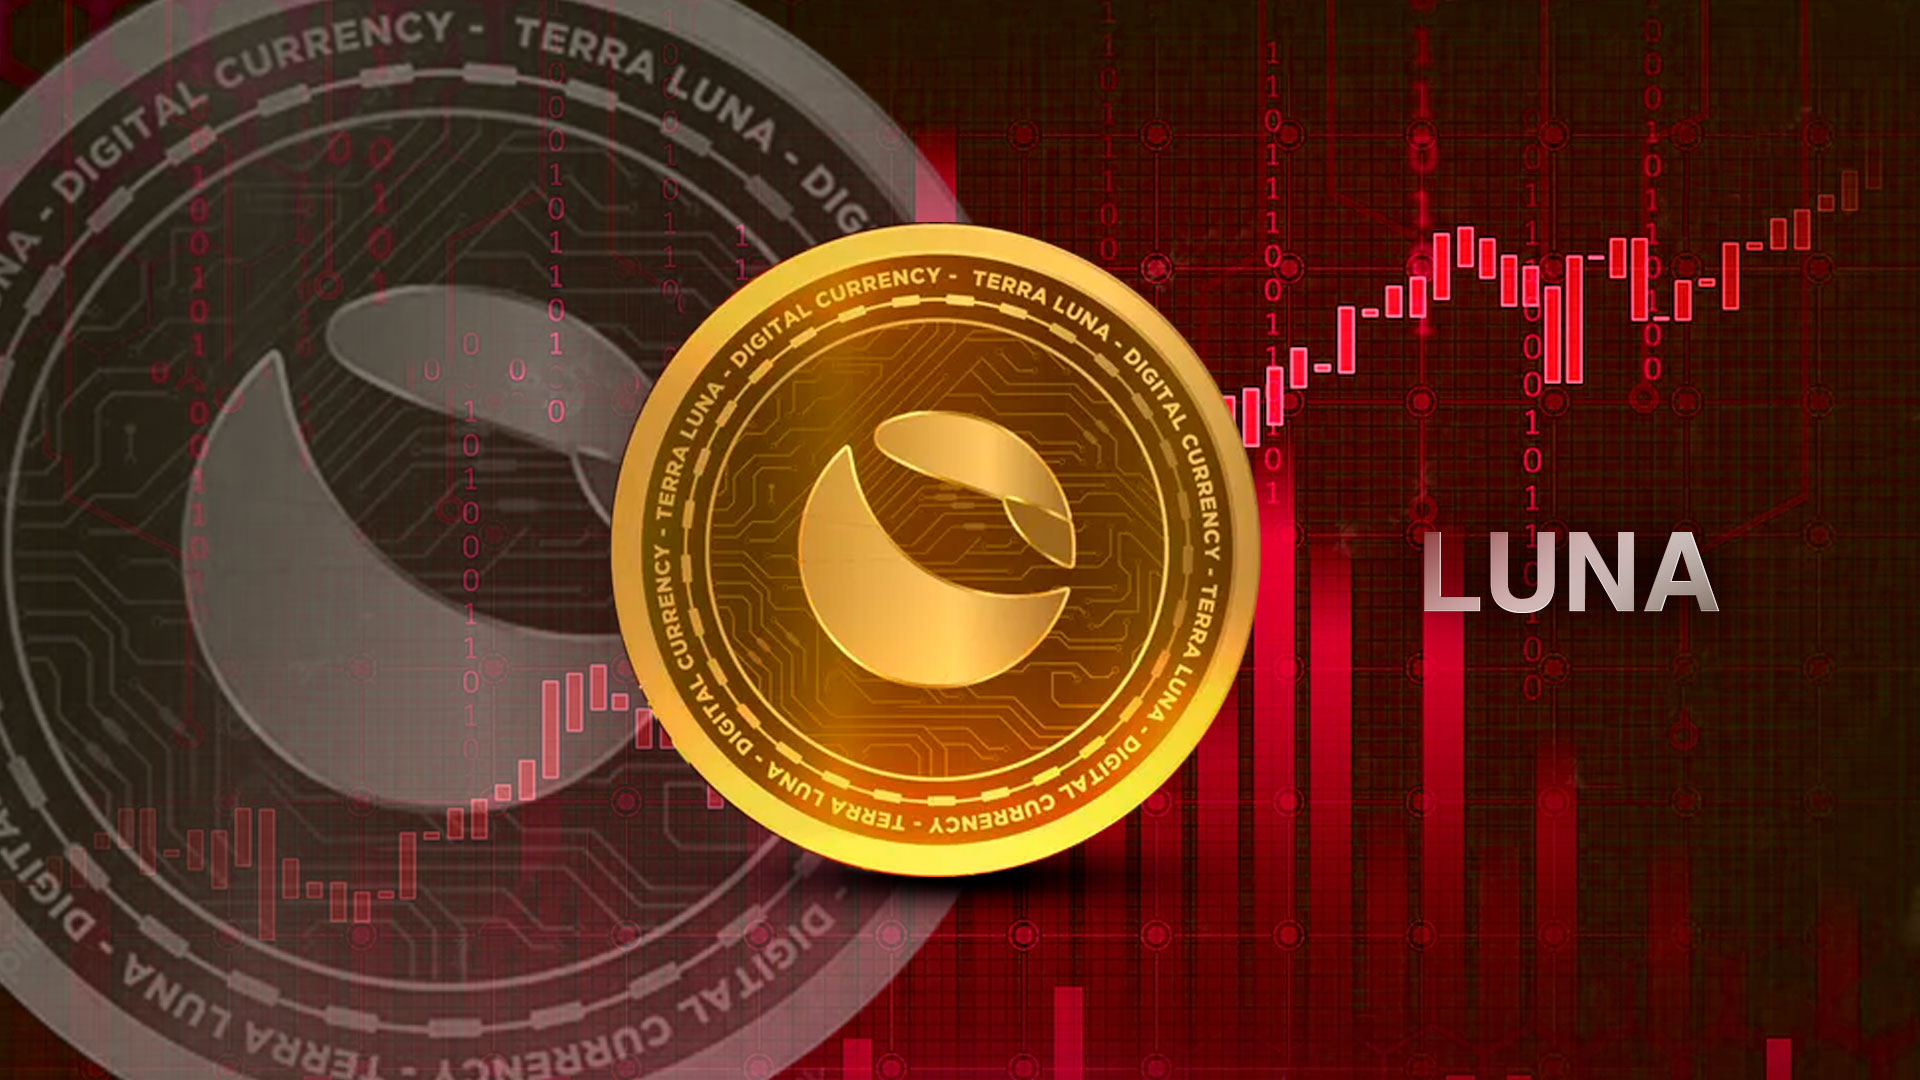 How the value of the LUNA cryptocurrency has changed in the last days